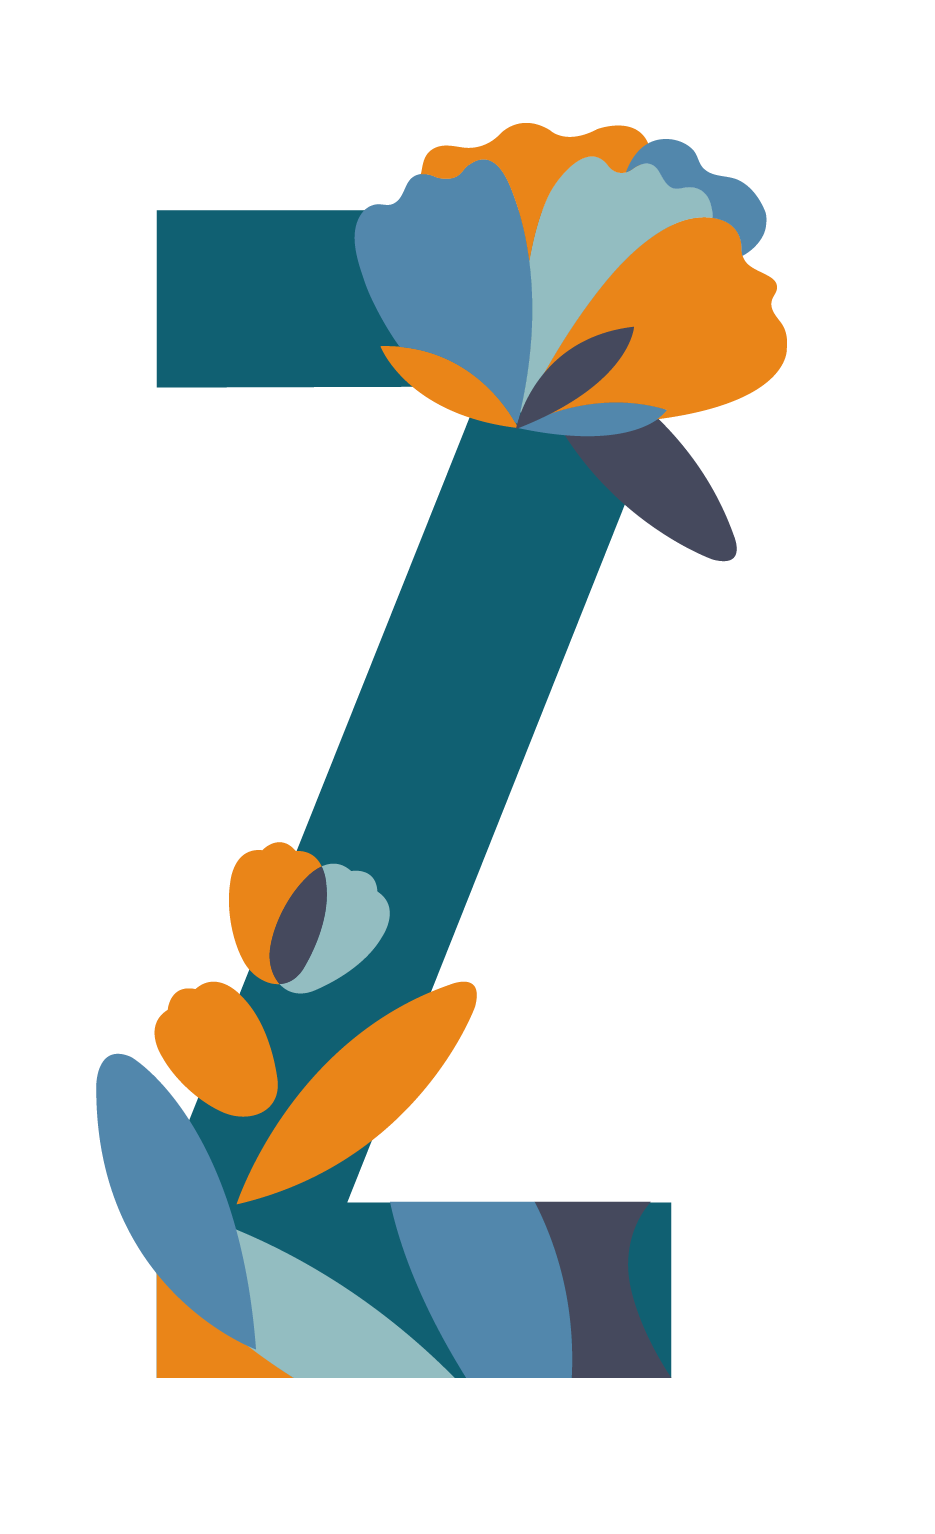 Z Letter PNG HD and HQ Image - Z Letter Png